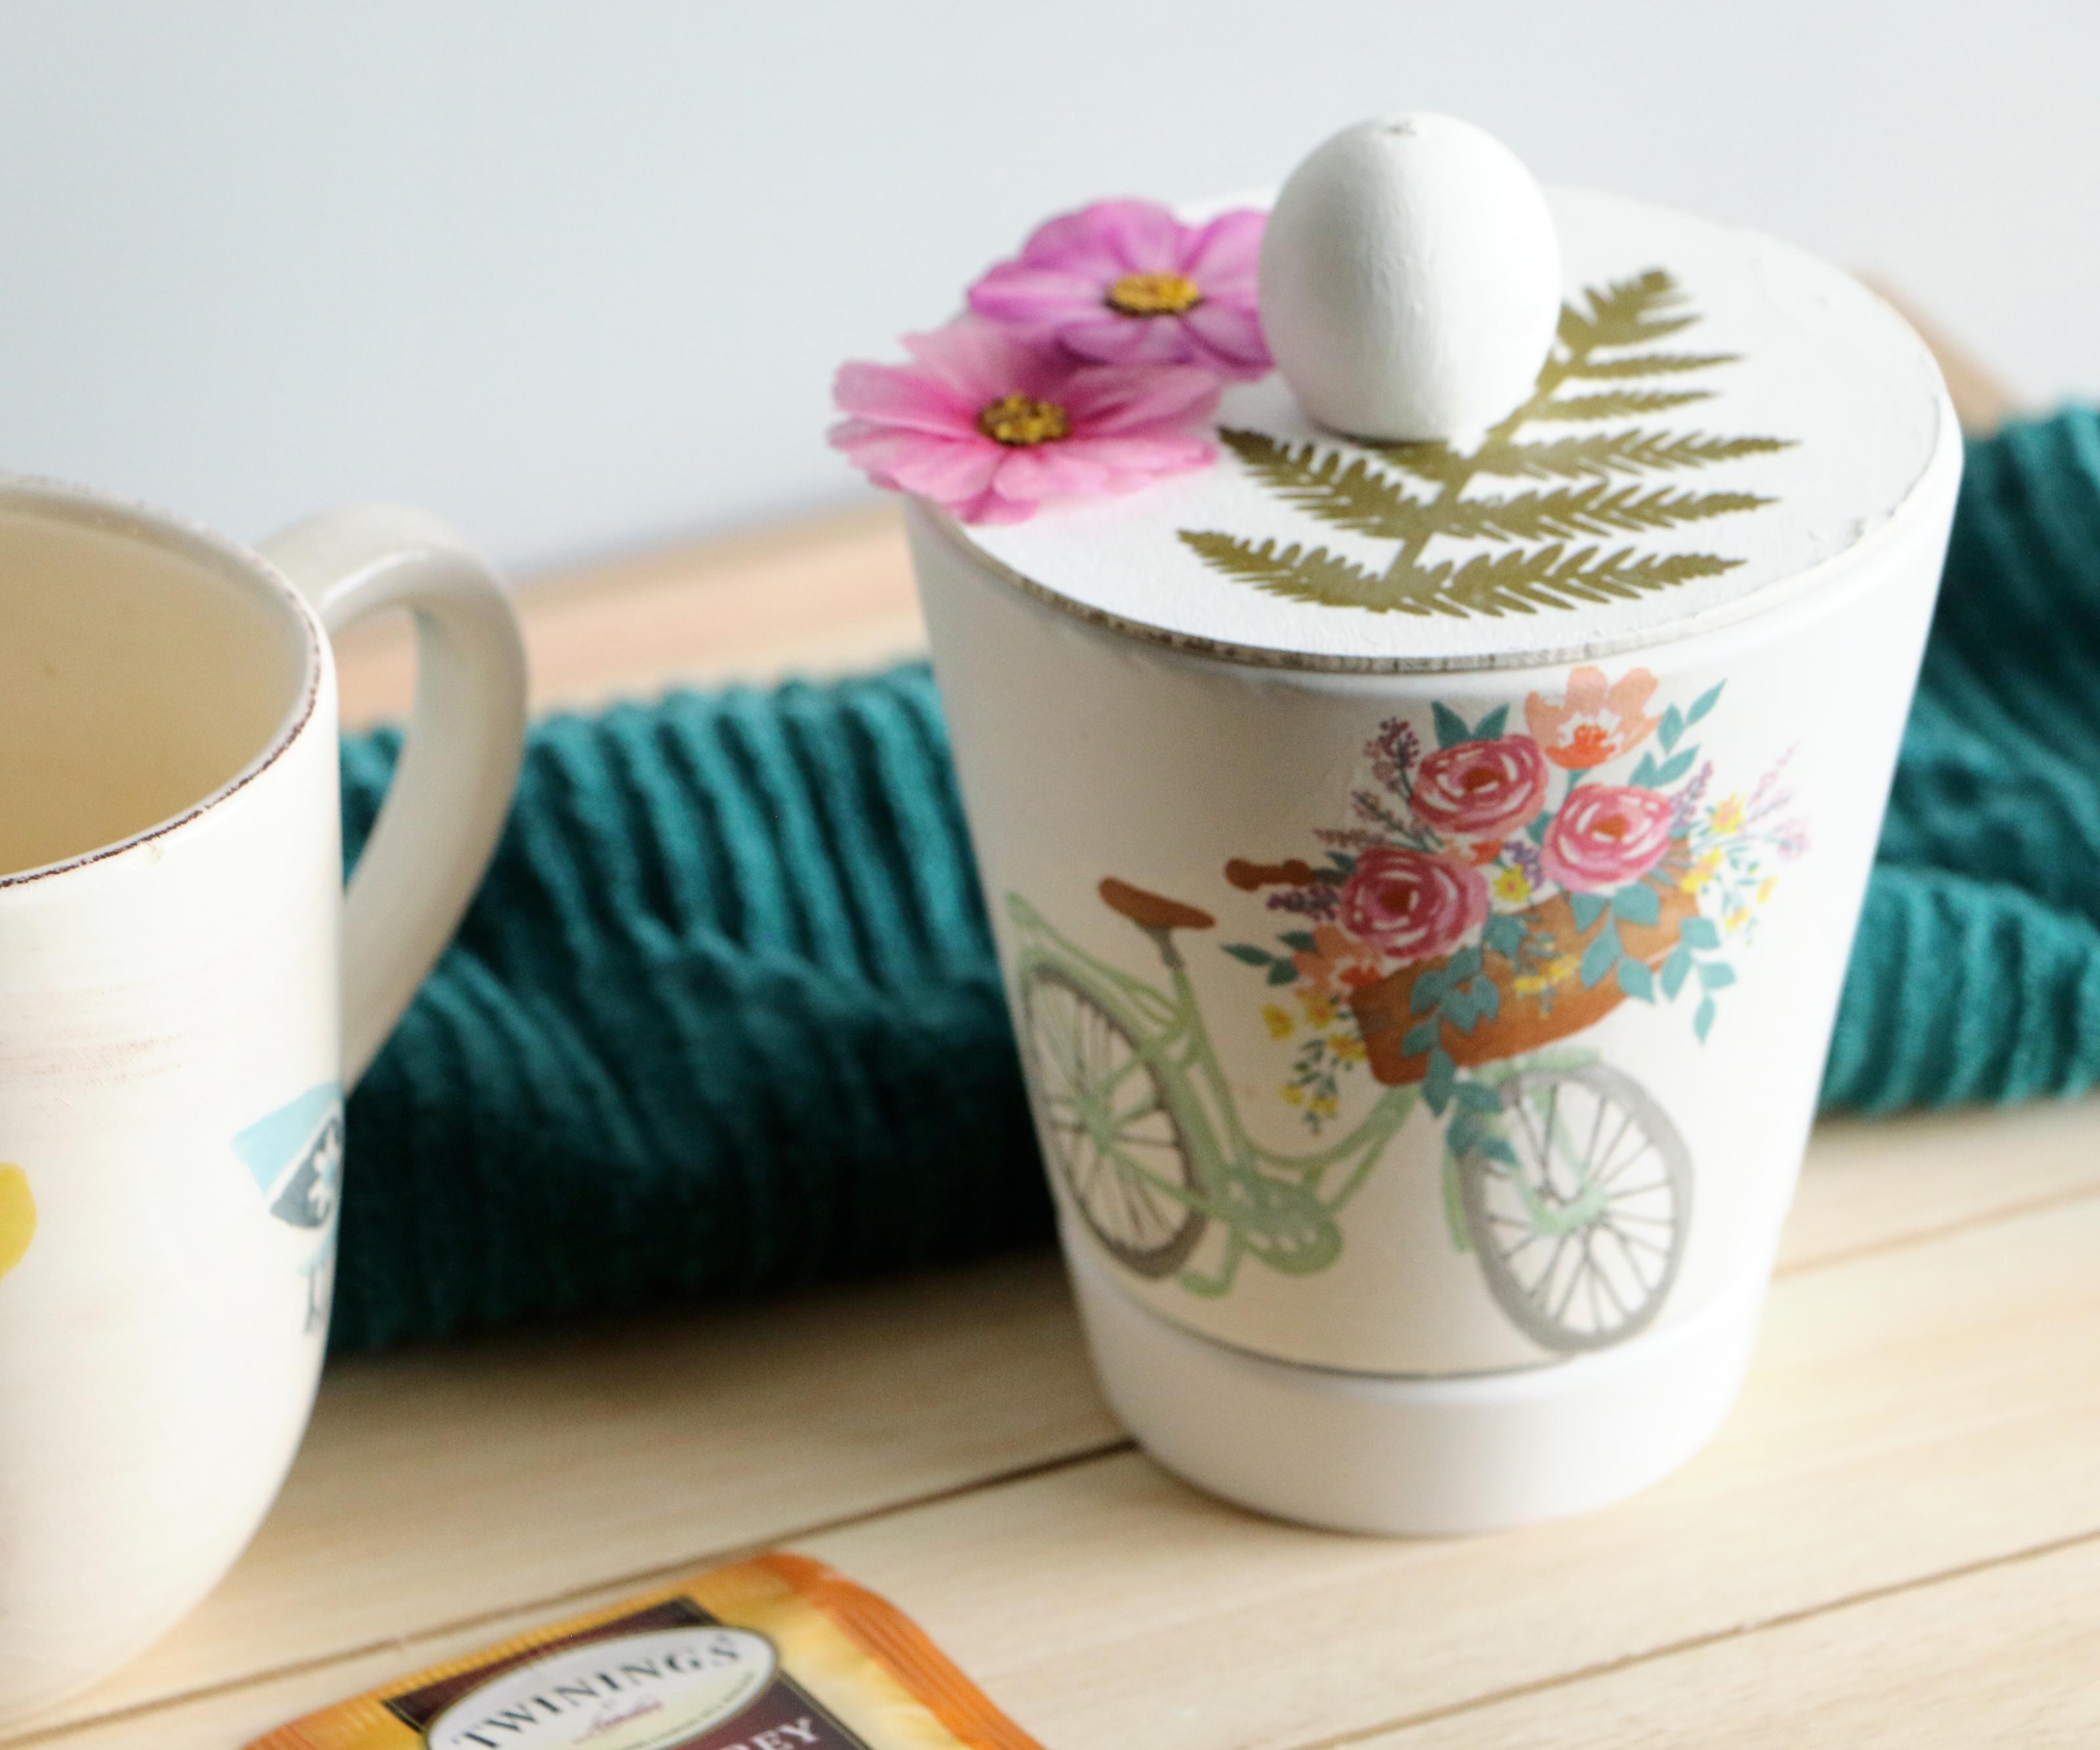 How to Make a Charming Tea Bag Holder Using a Garden Pot and Wood Circle